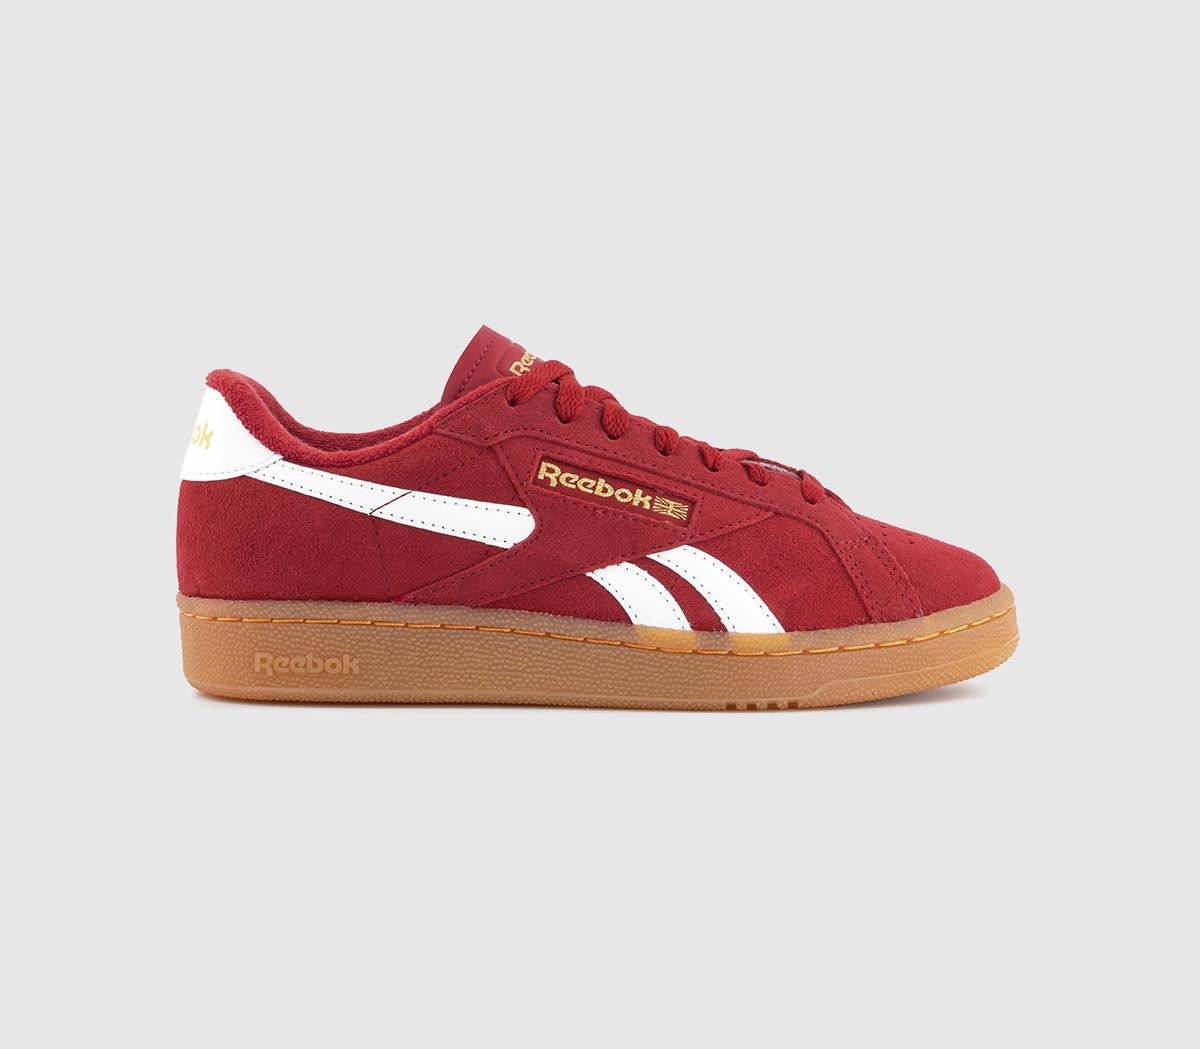 Club C Grounds Trainers Flash Red Gum